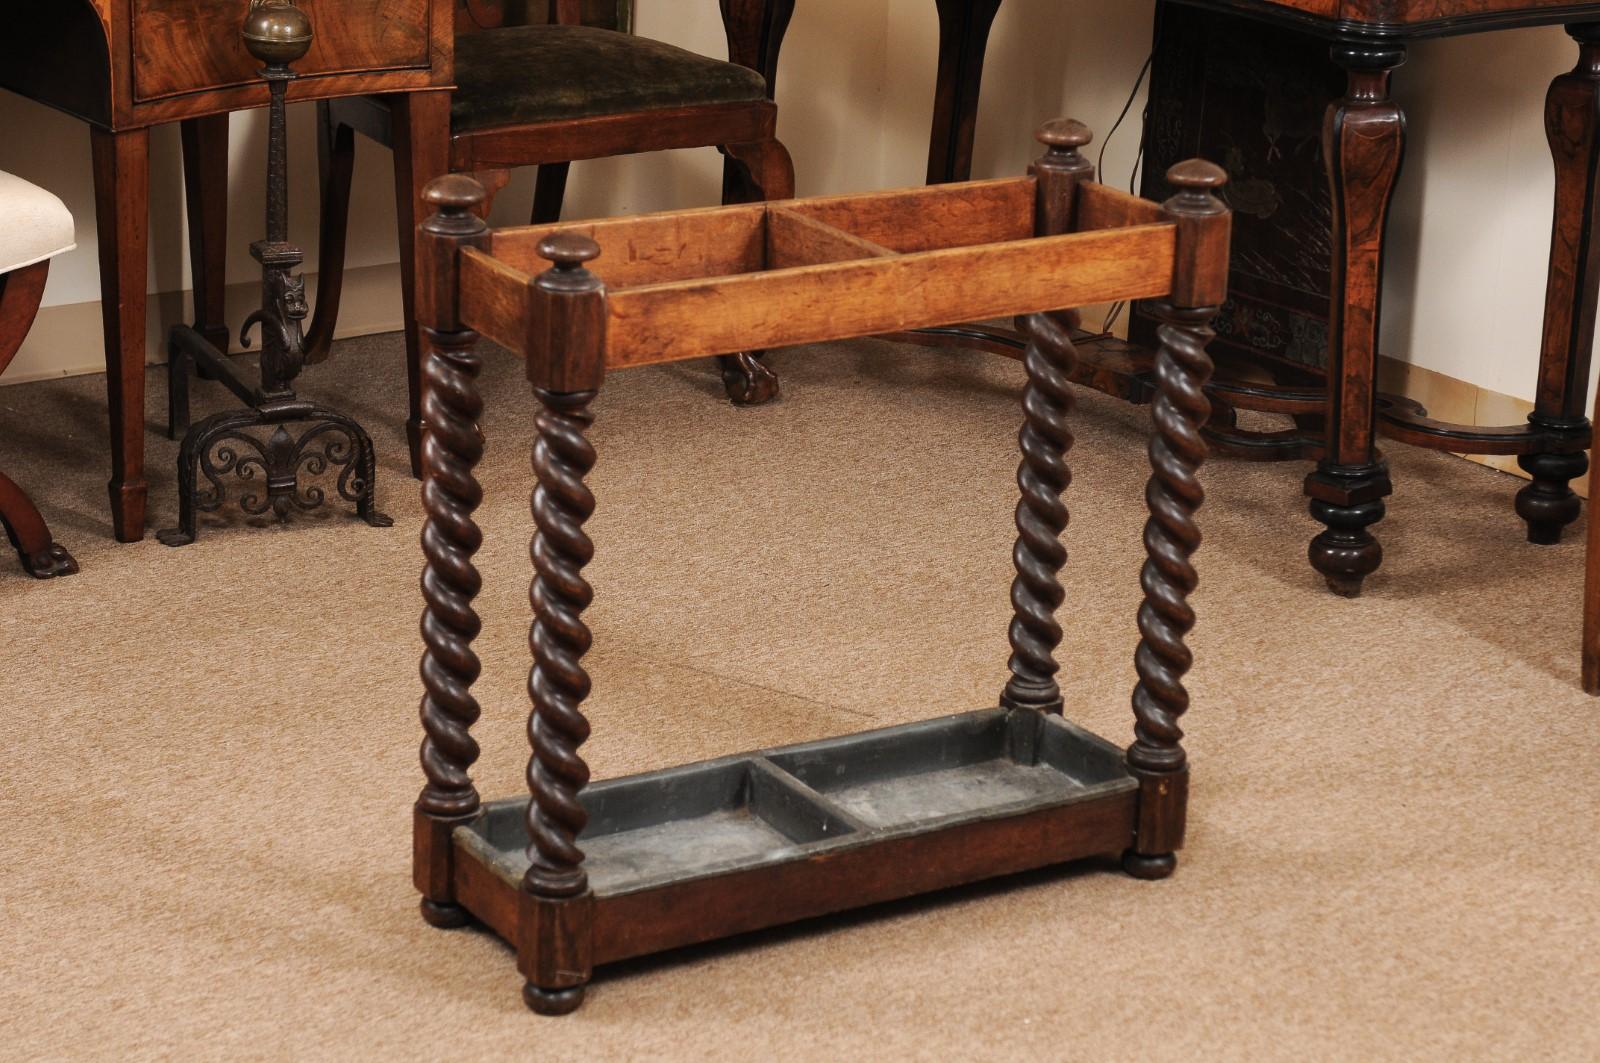 The late 19th century English oak umbrella stand with barley twist detail and bun feet.